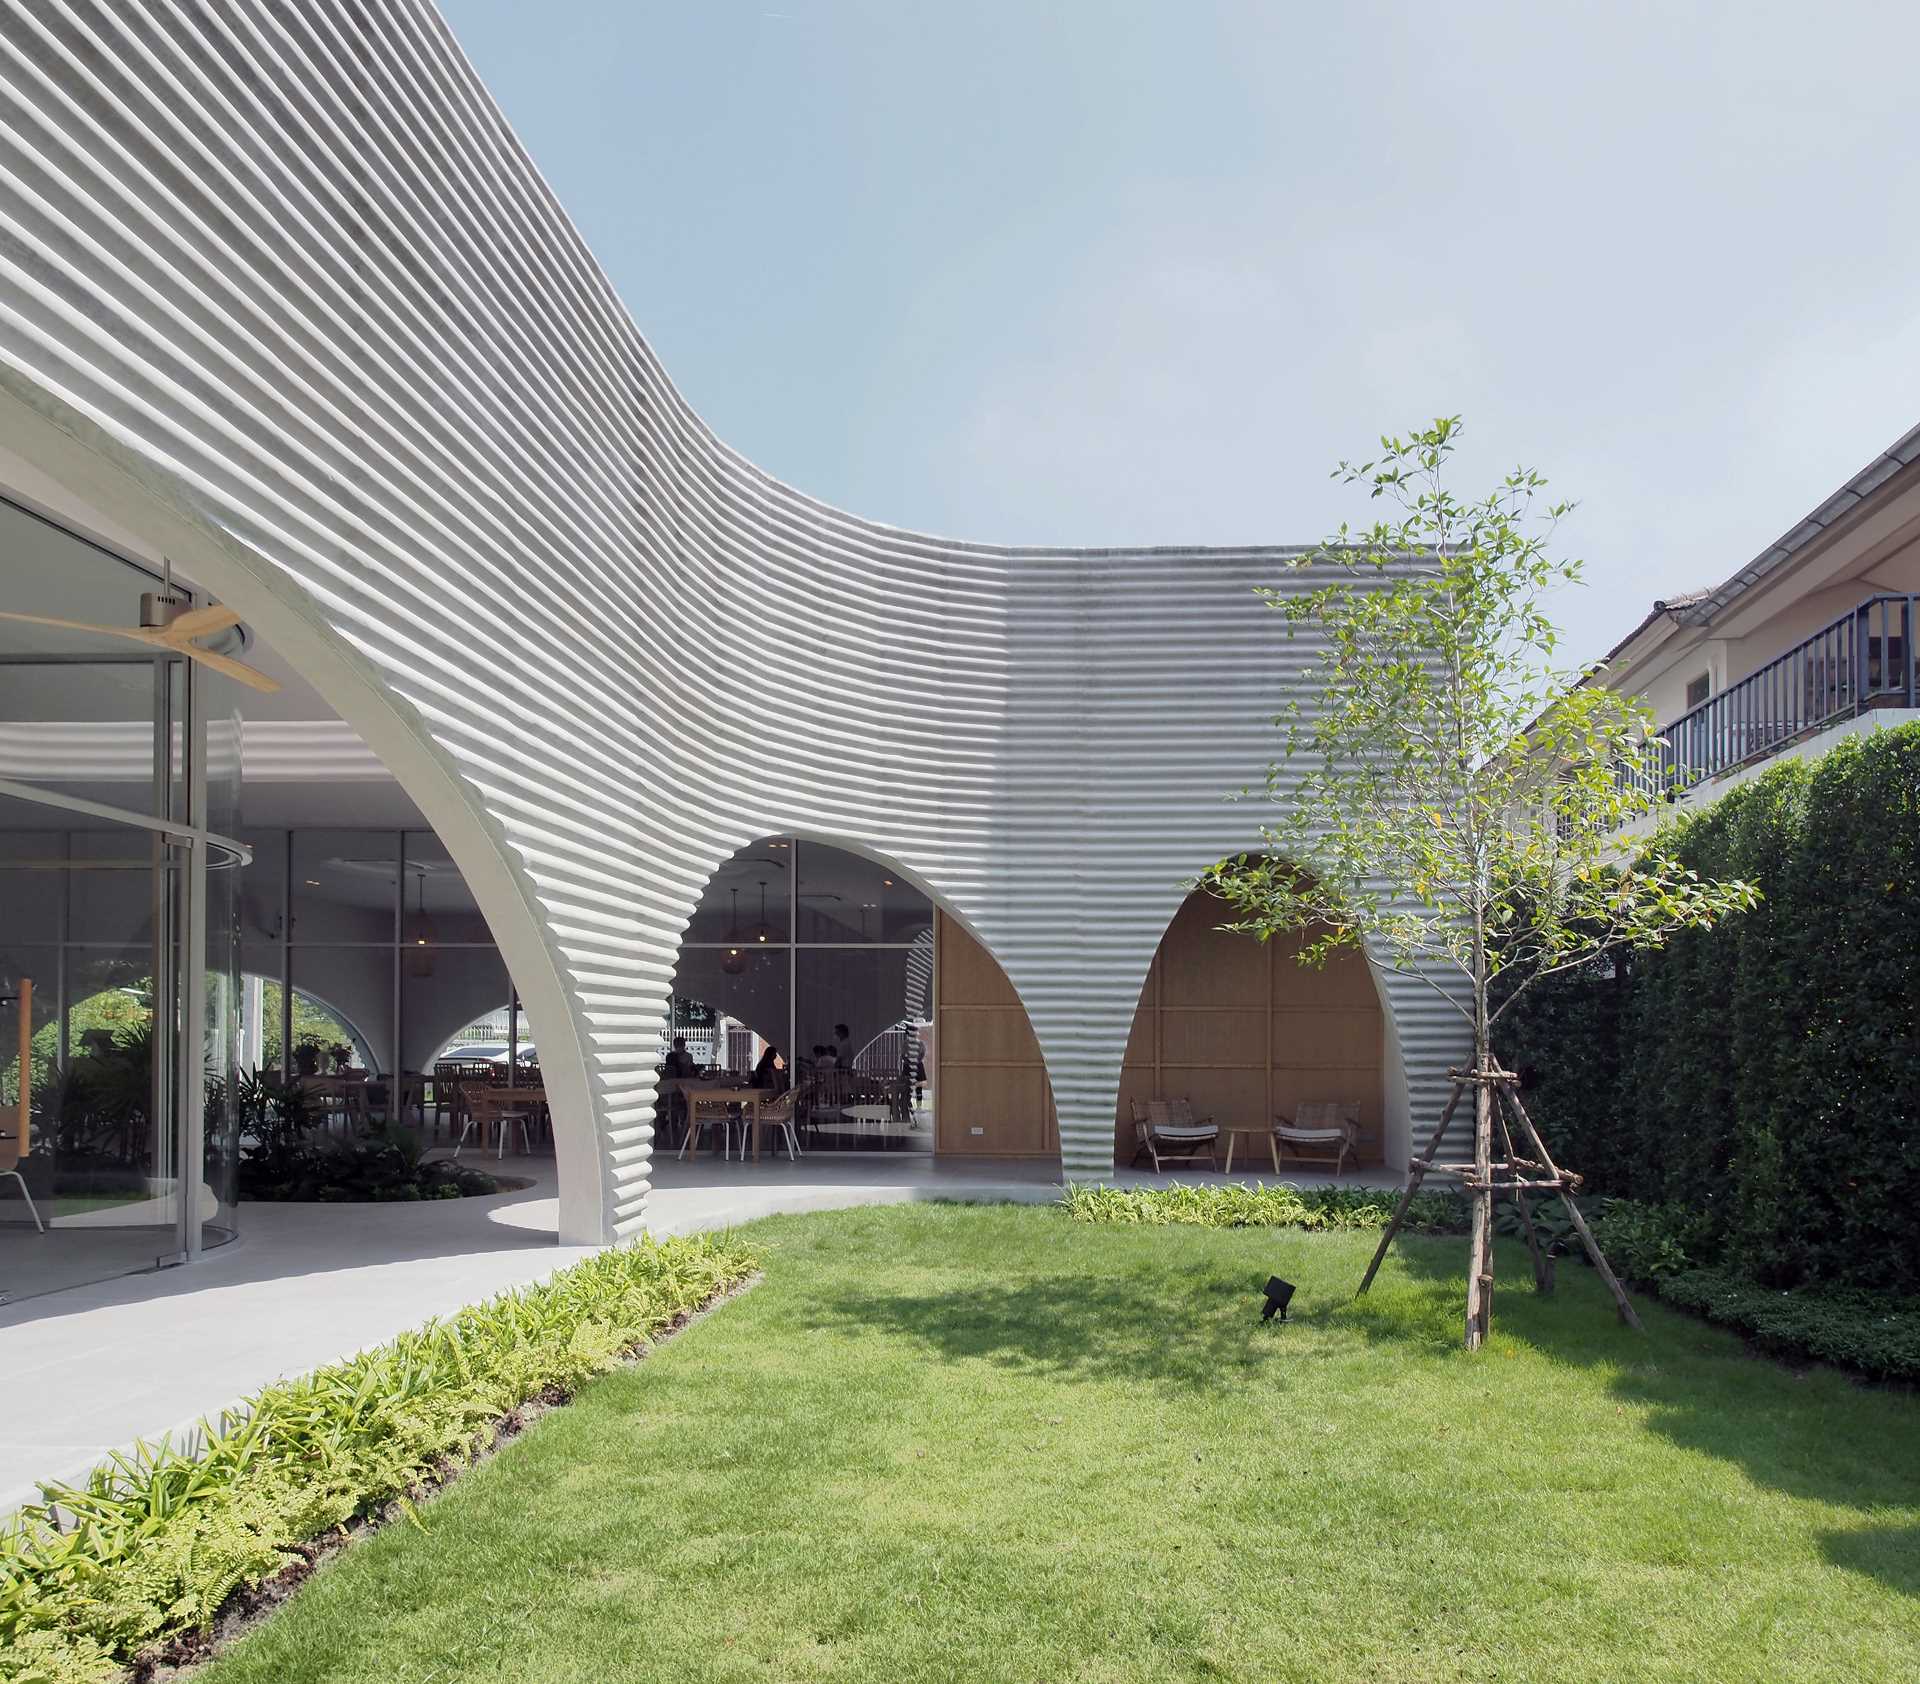 A modern restaurant and cafe with a wavy pre-case concrete facade and arched openings.